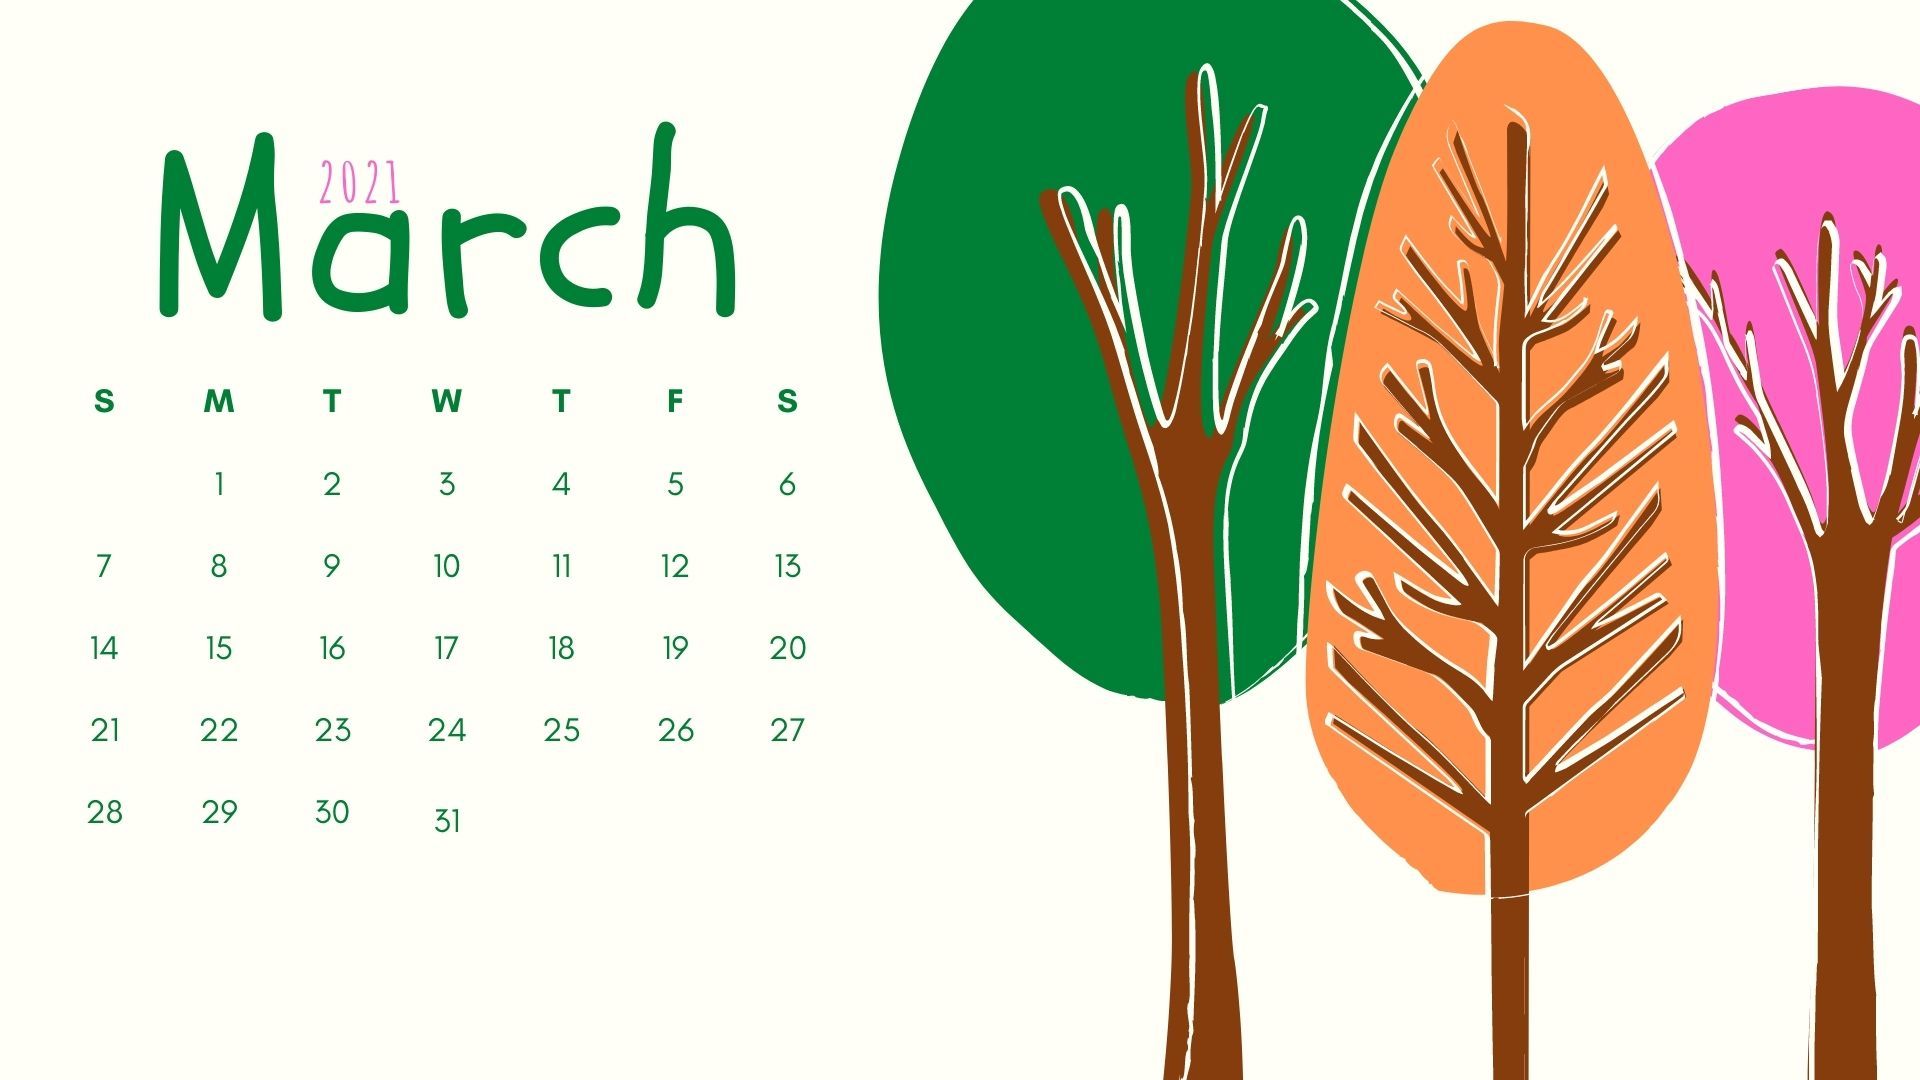 March Calendar Desktop Wallpaper To Use As Background Image